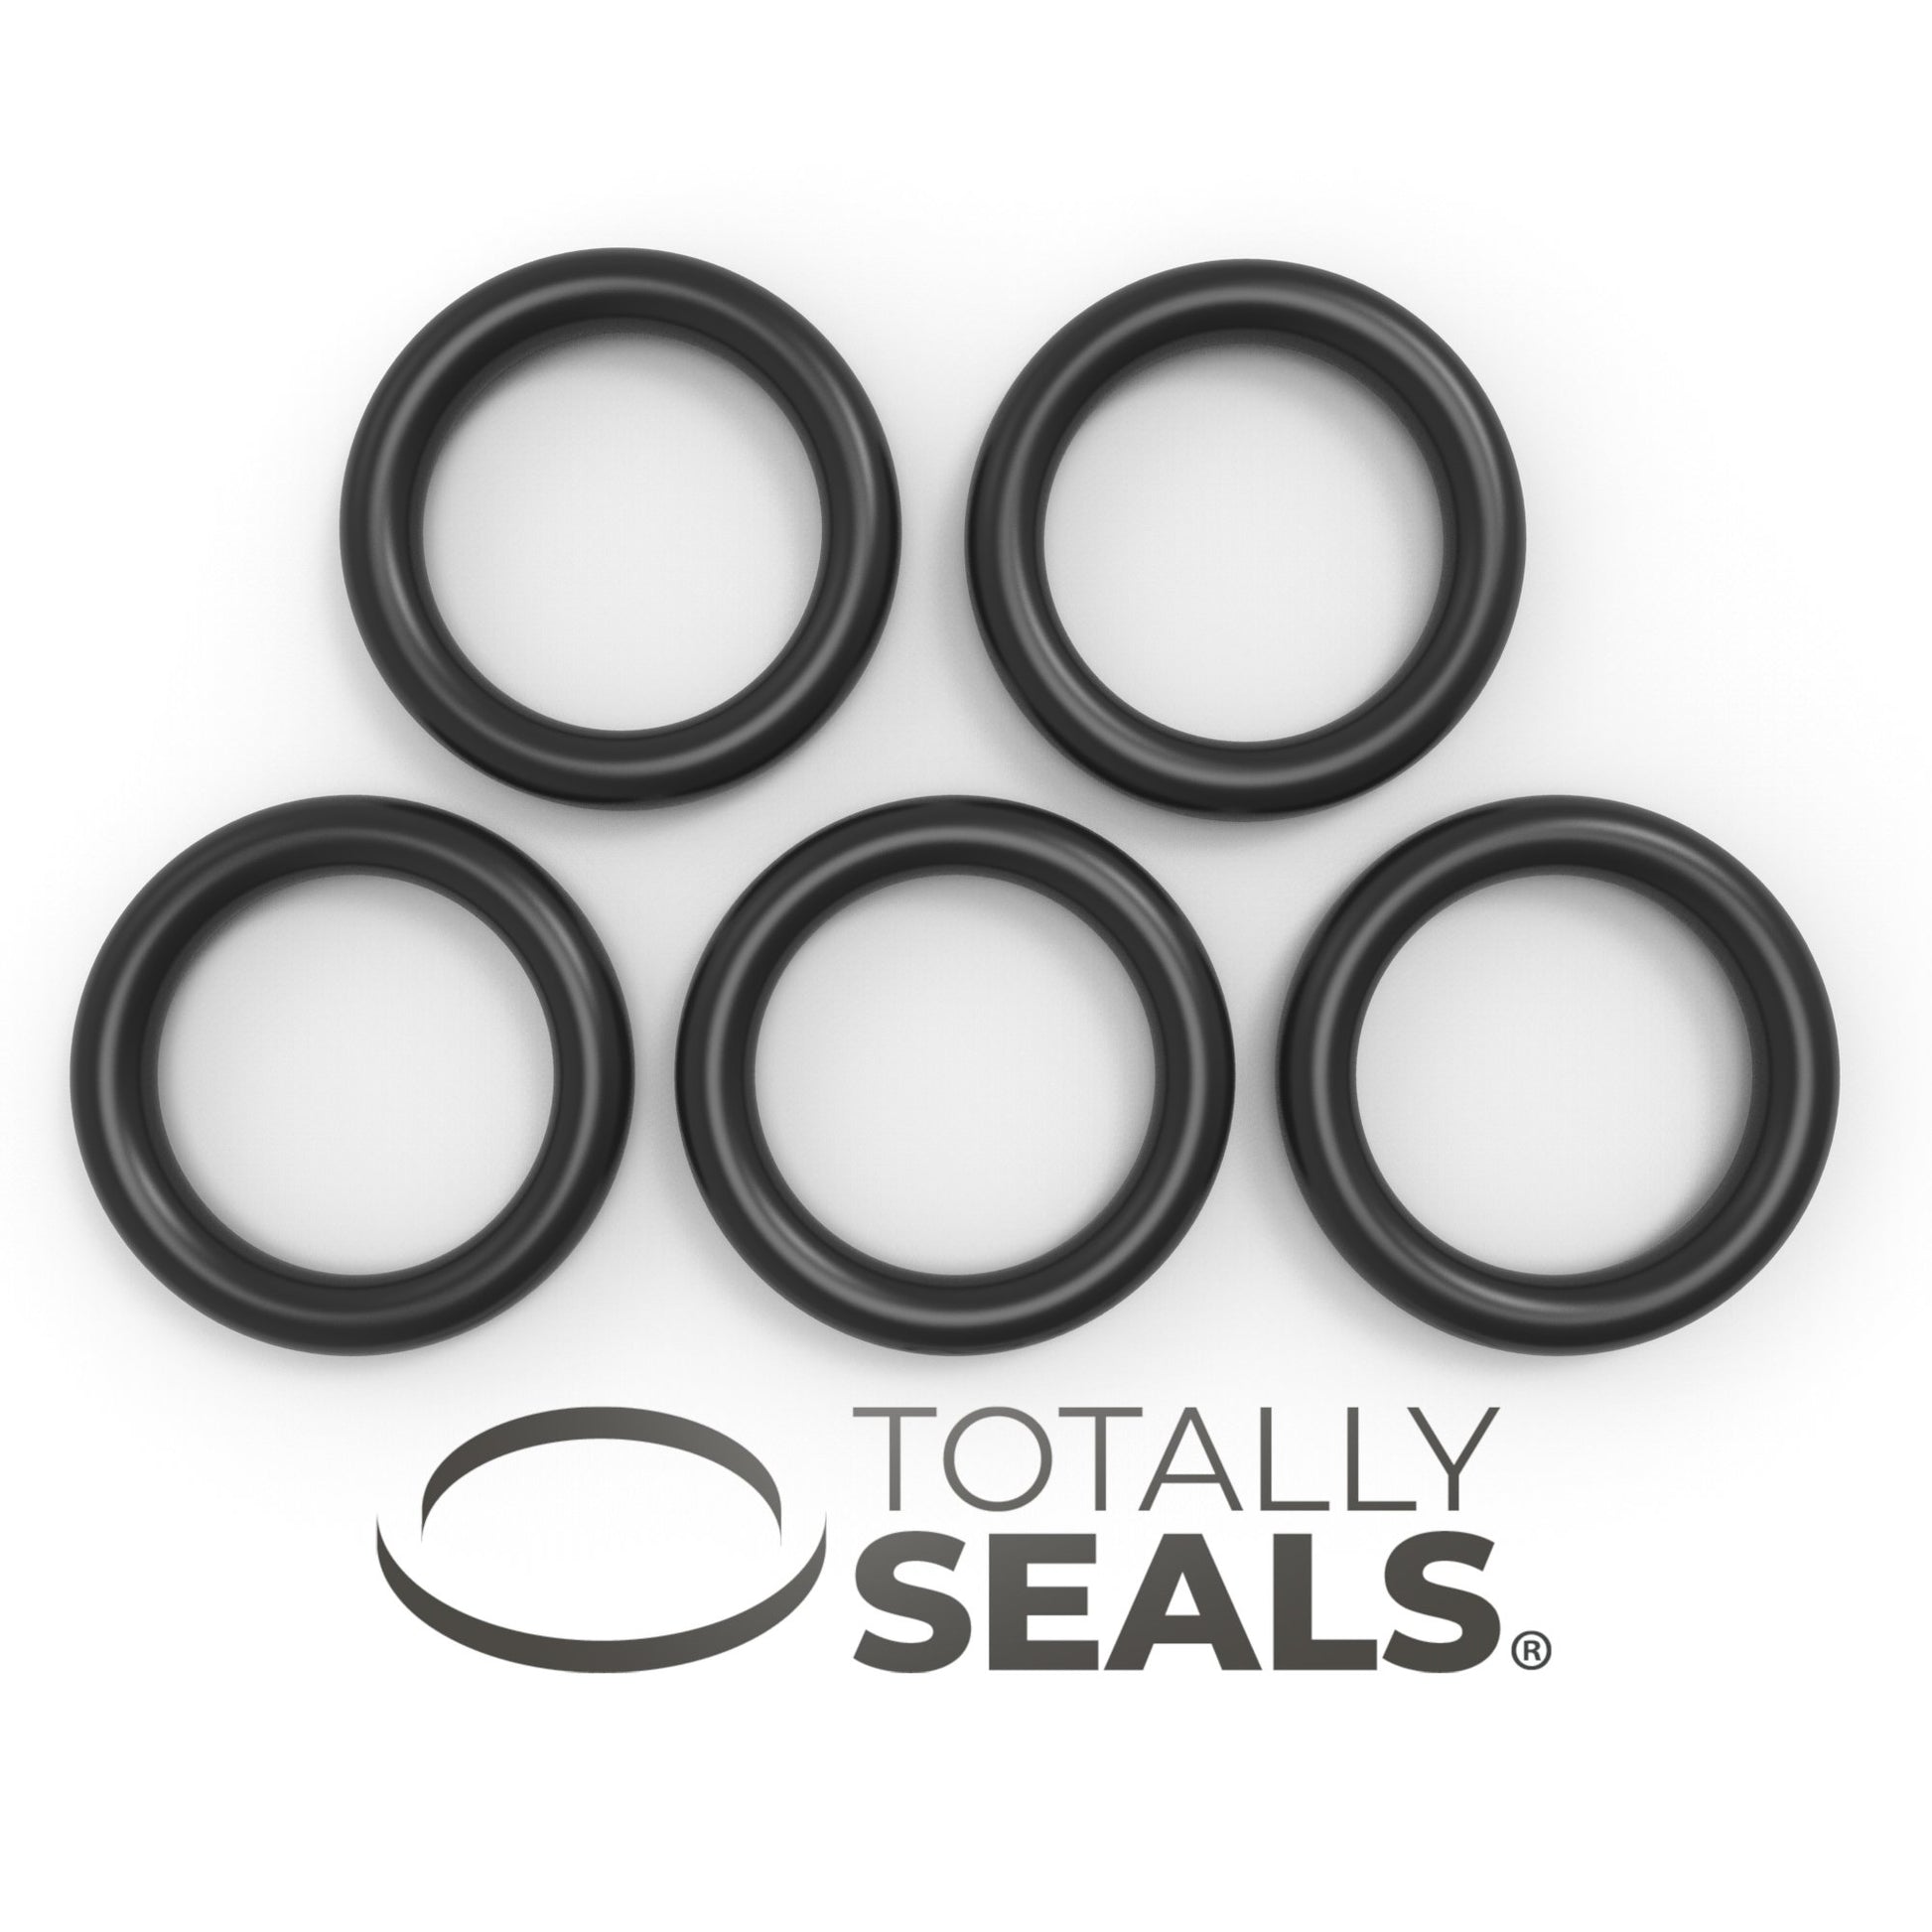 1 1/2" x 3/16" (BS325) Imperial Nitrile Rubber O-Rings - Totally Seals®